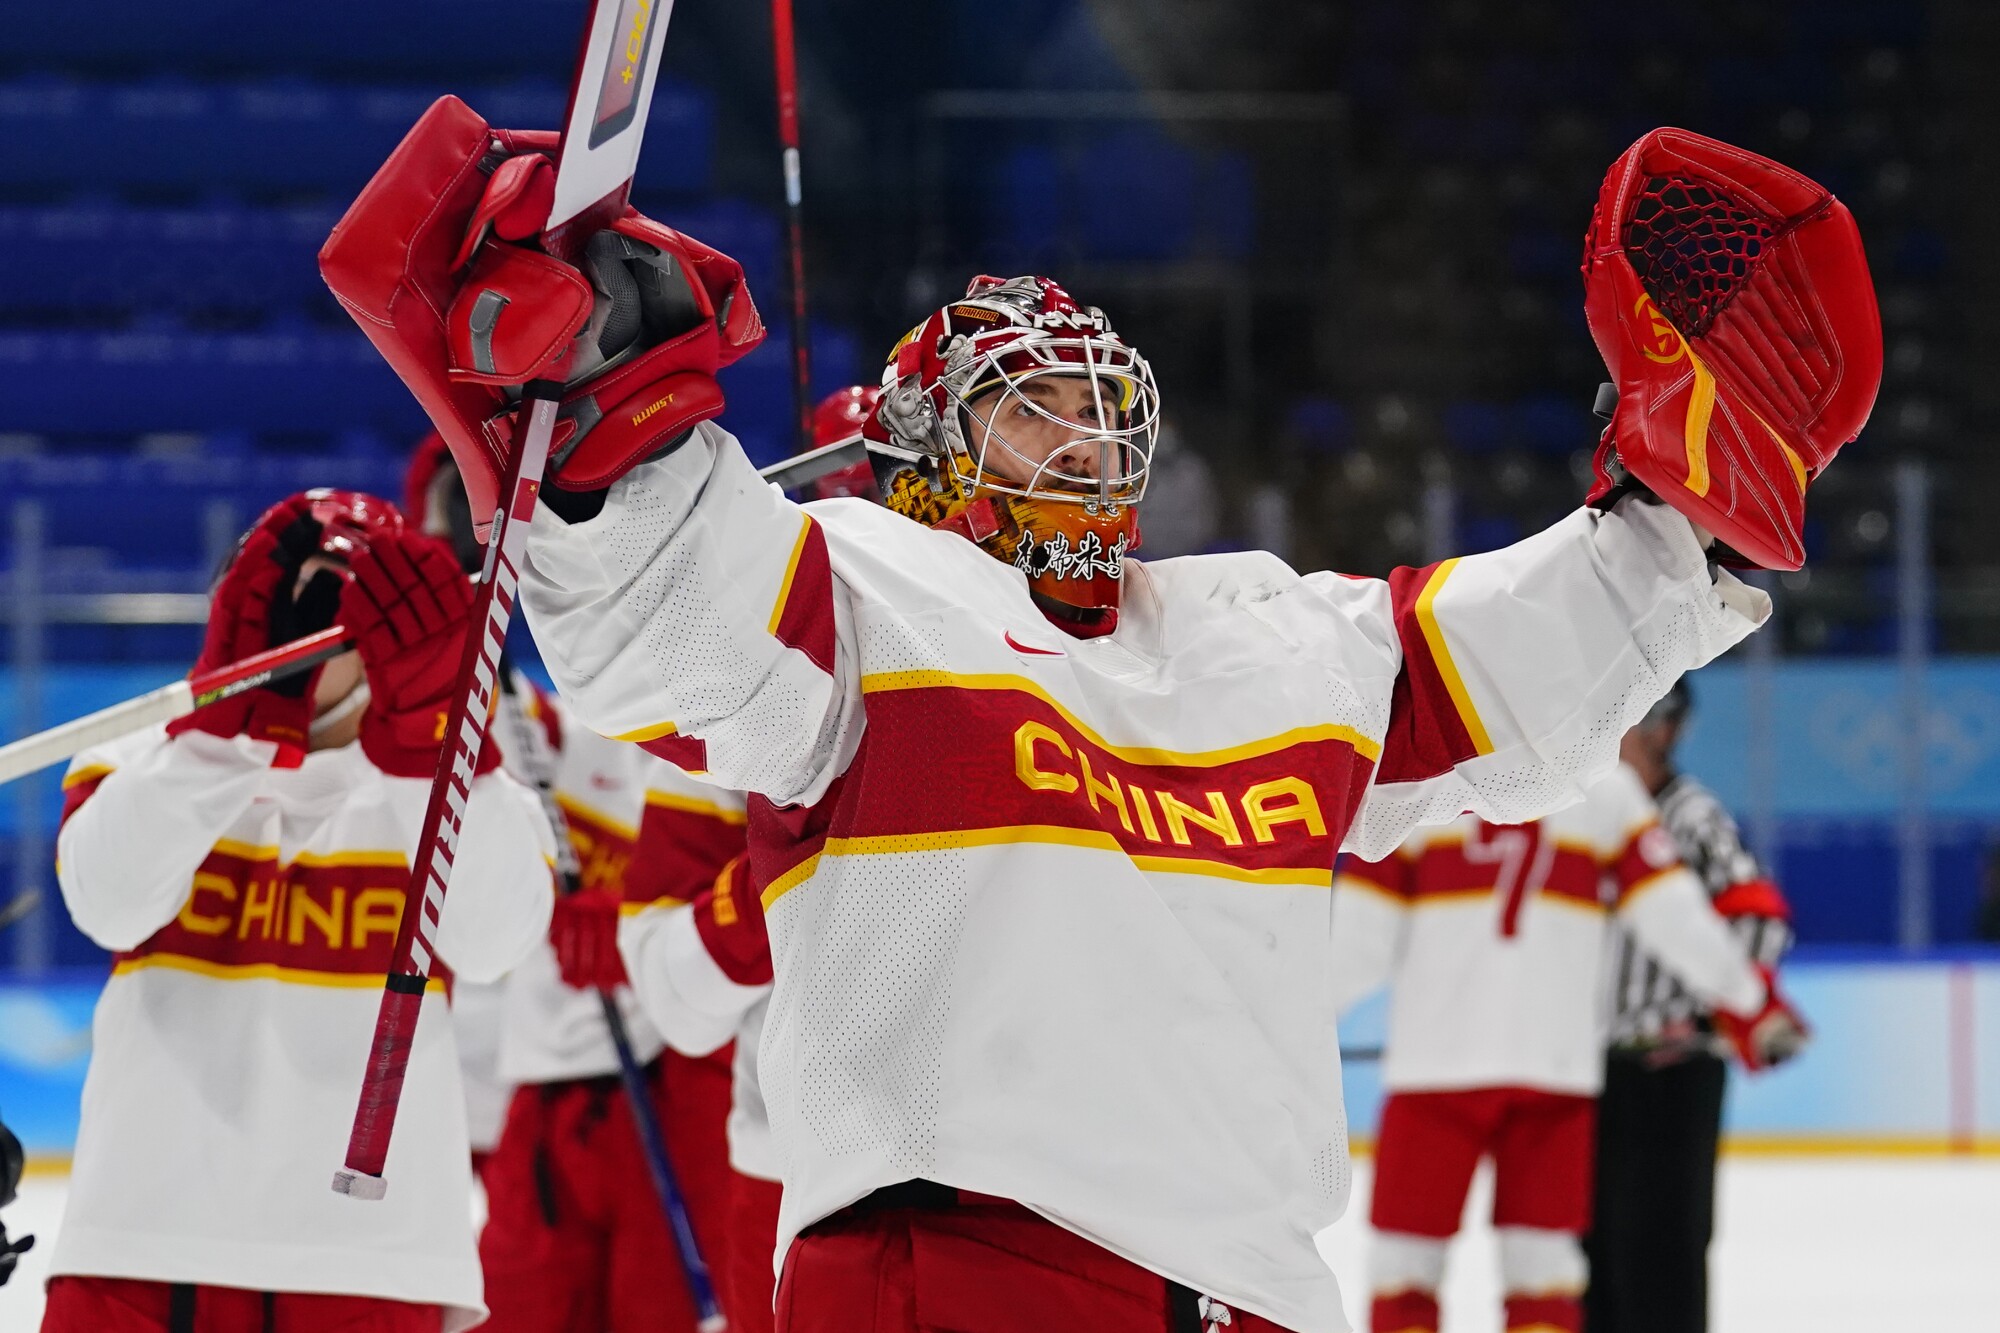 China goalkeeper Jieruimi Shimisi (Jeremy Smith) waves to fans after a match against Germany on Saturday.